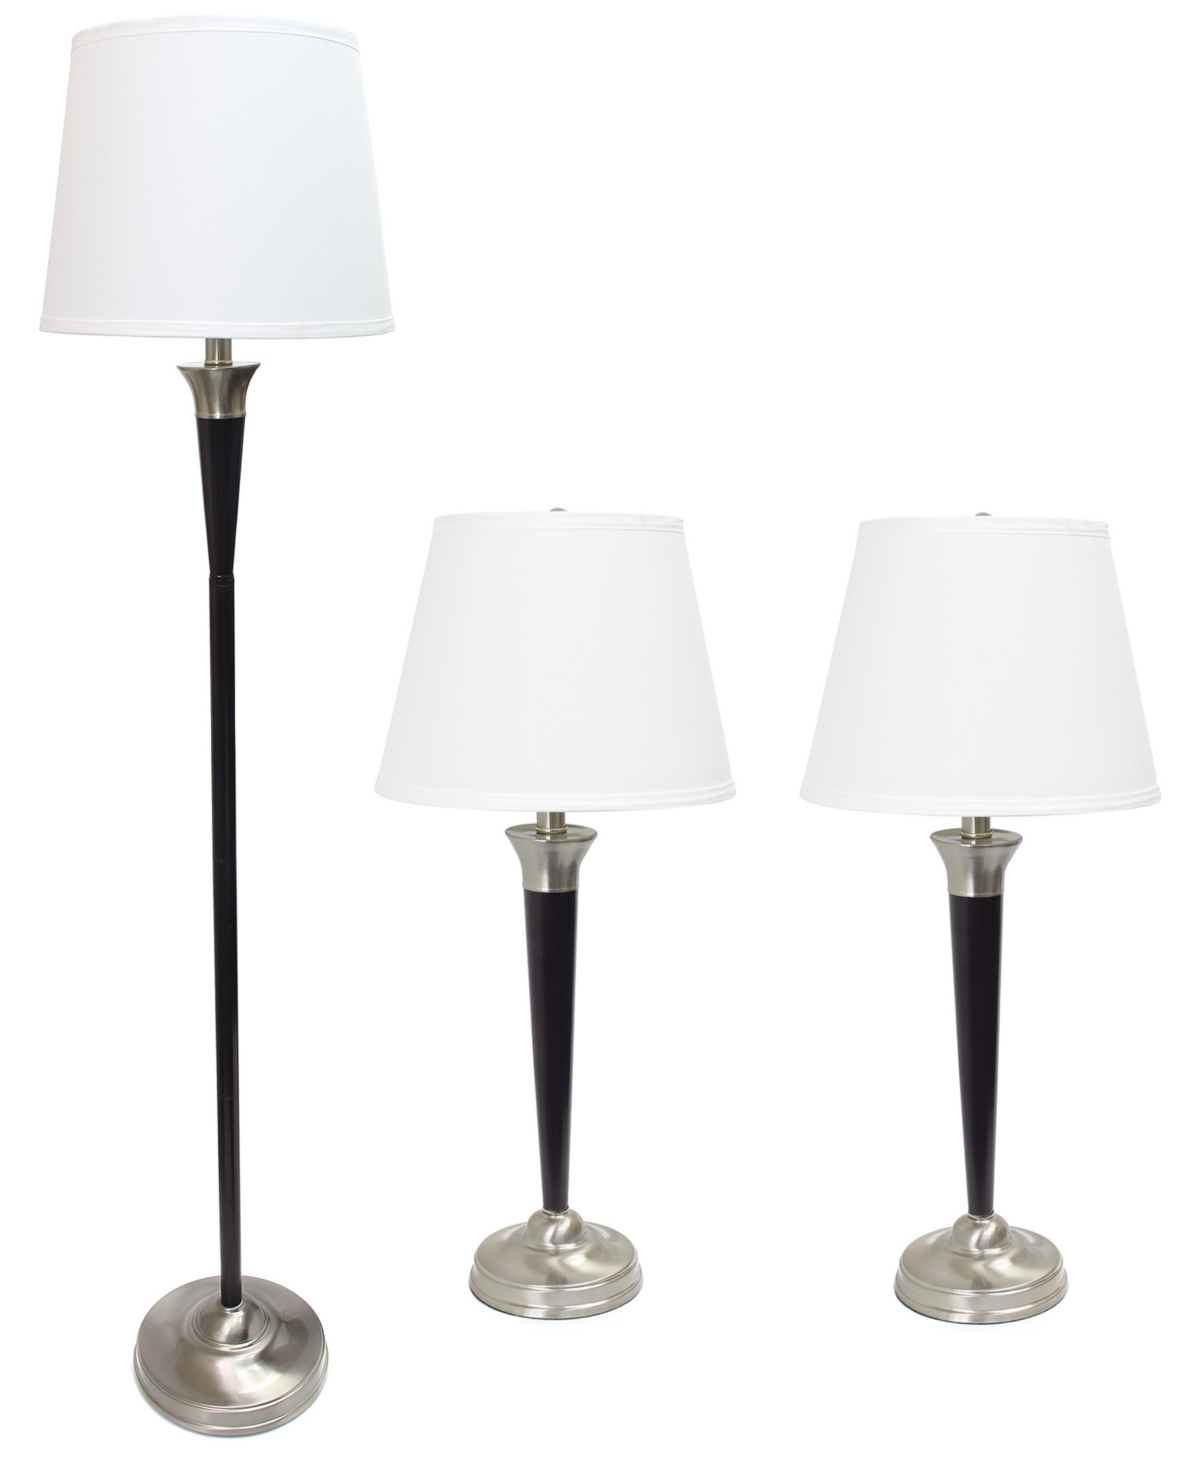 All The Rages Lalia Home Sonoma 3 Piece Metal Lamp Set In Brushed Nickel